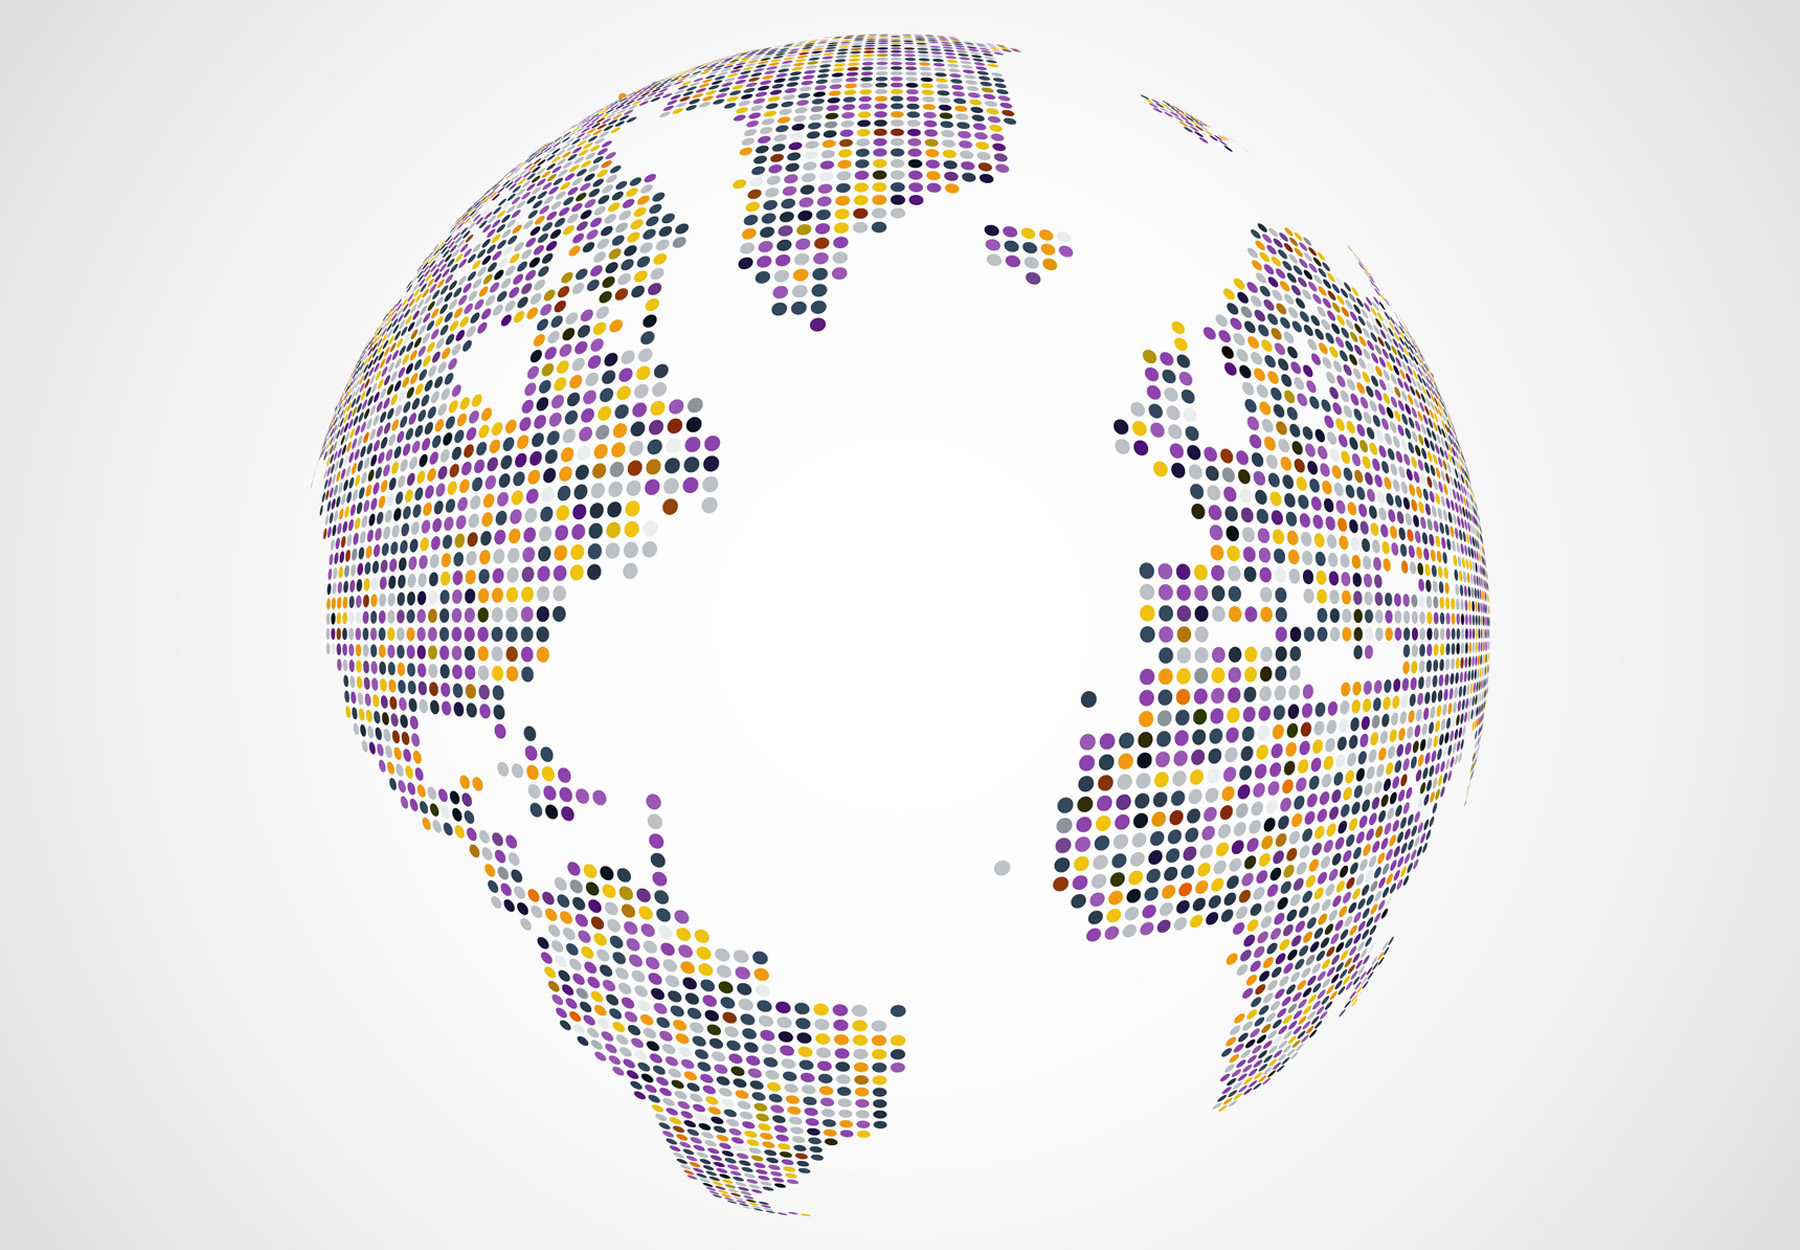 A stock illustration of the Earth with the continents made up of many different colored dots to represent genetic diversity